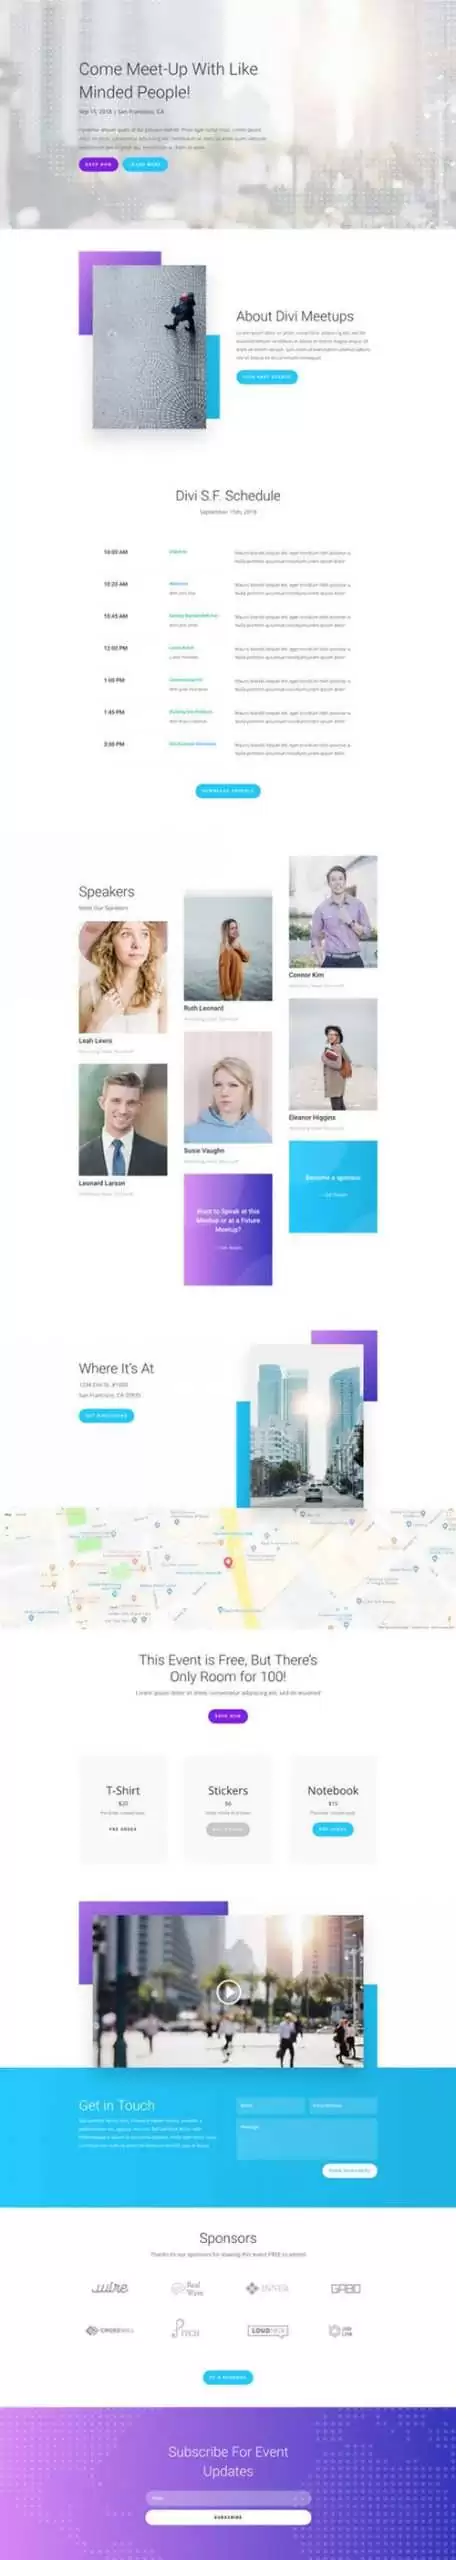 meetup landing page scaled